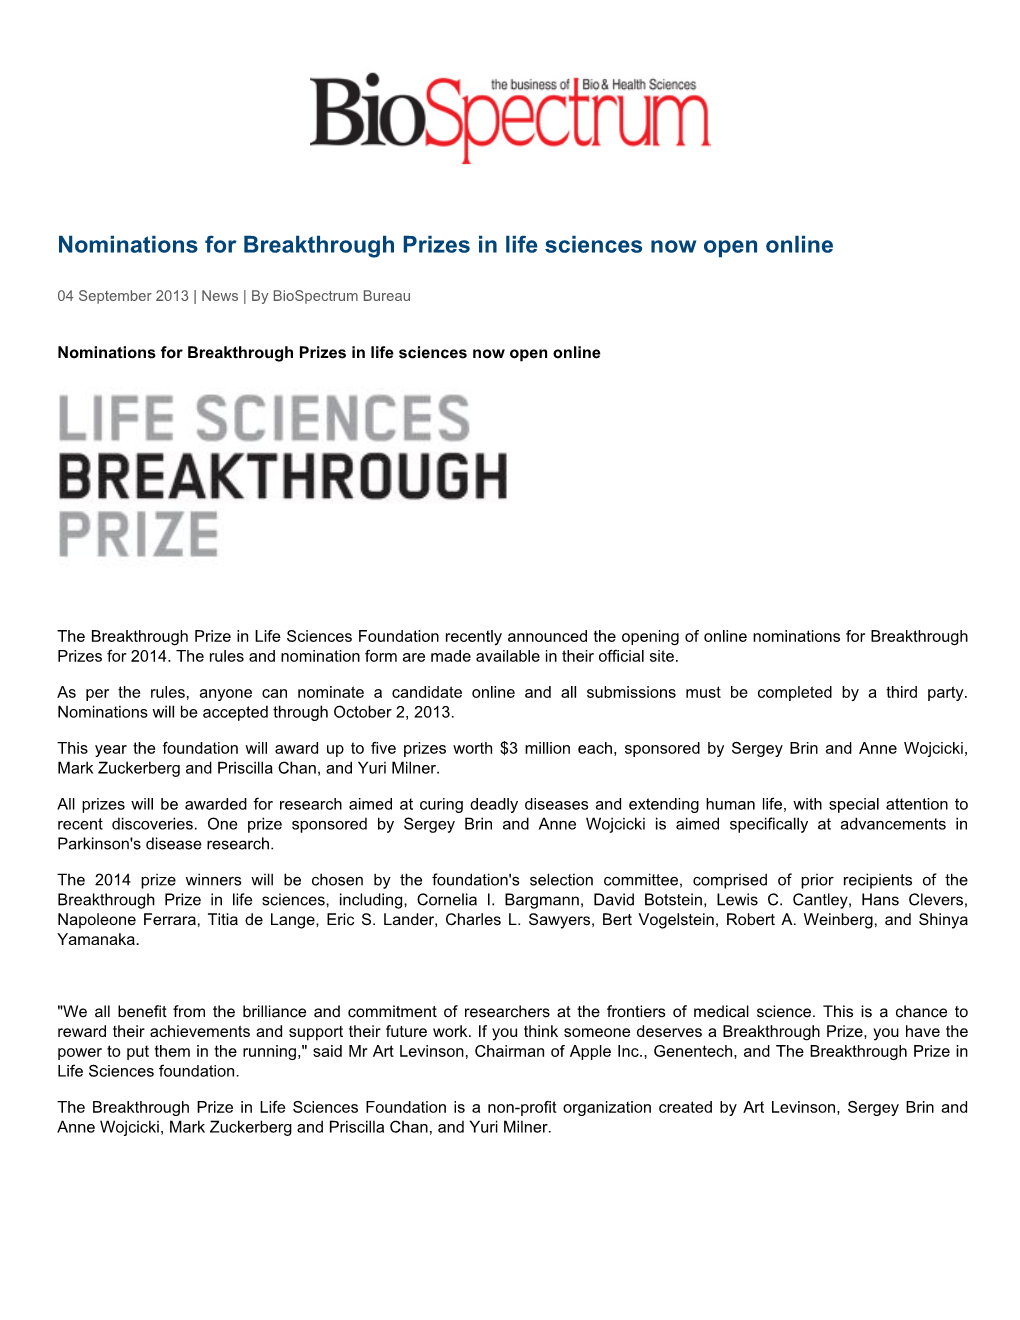 Nominations for Breakthrough Prizes in Life Sciences Now Open Online